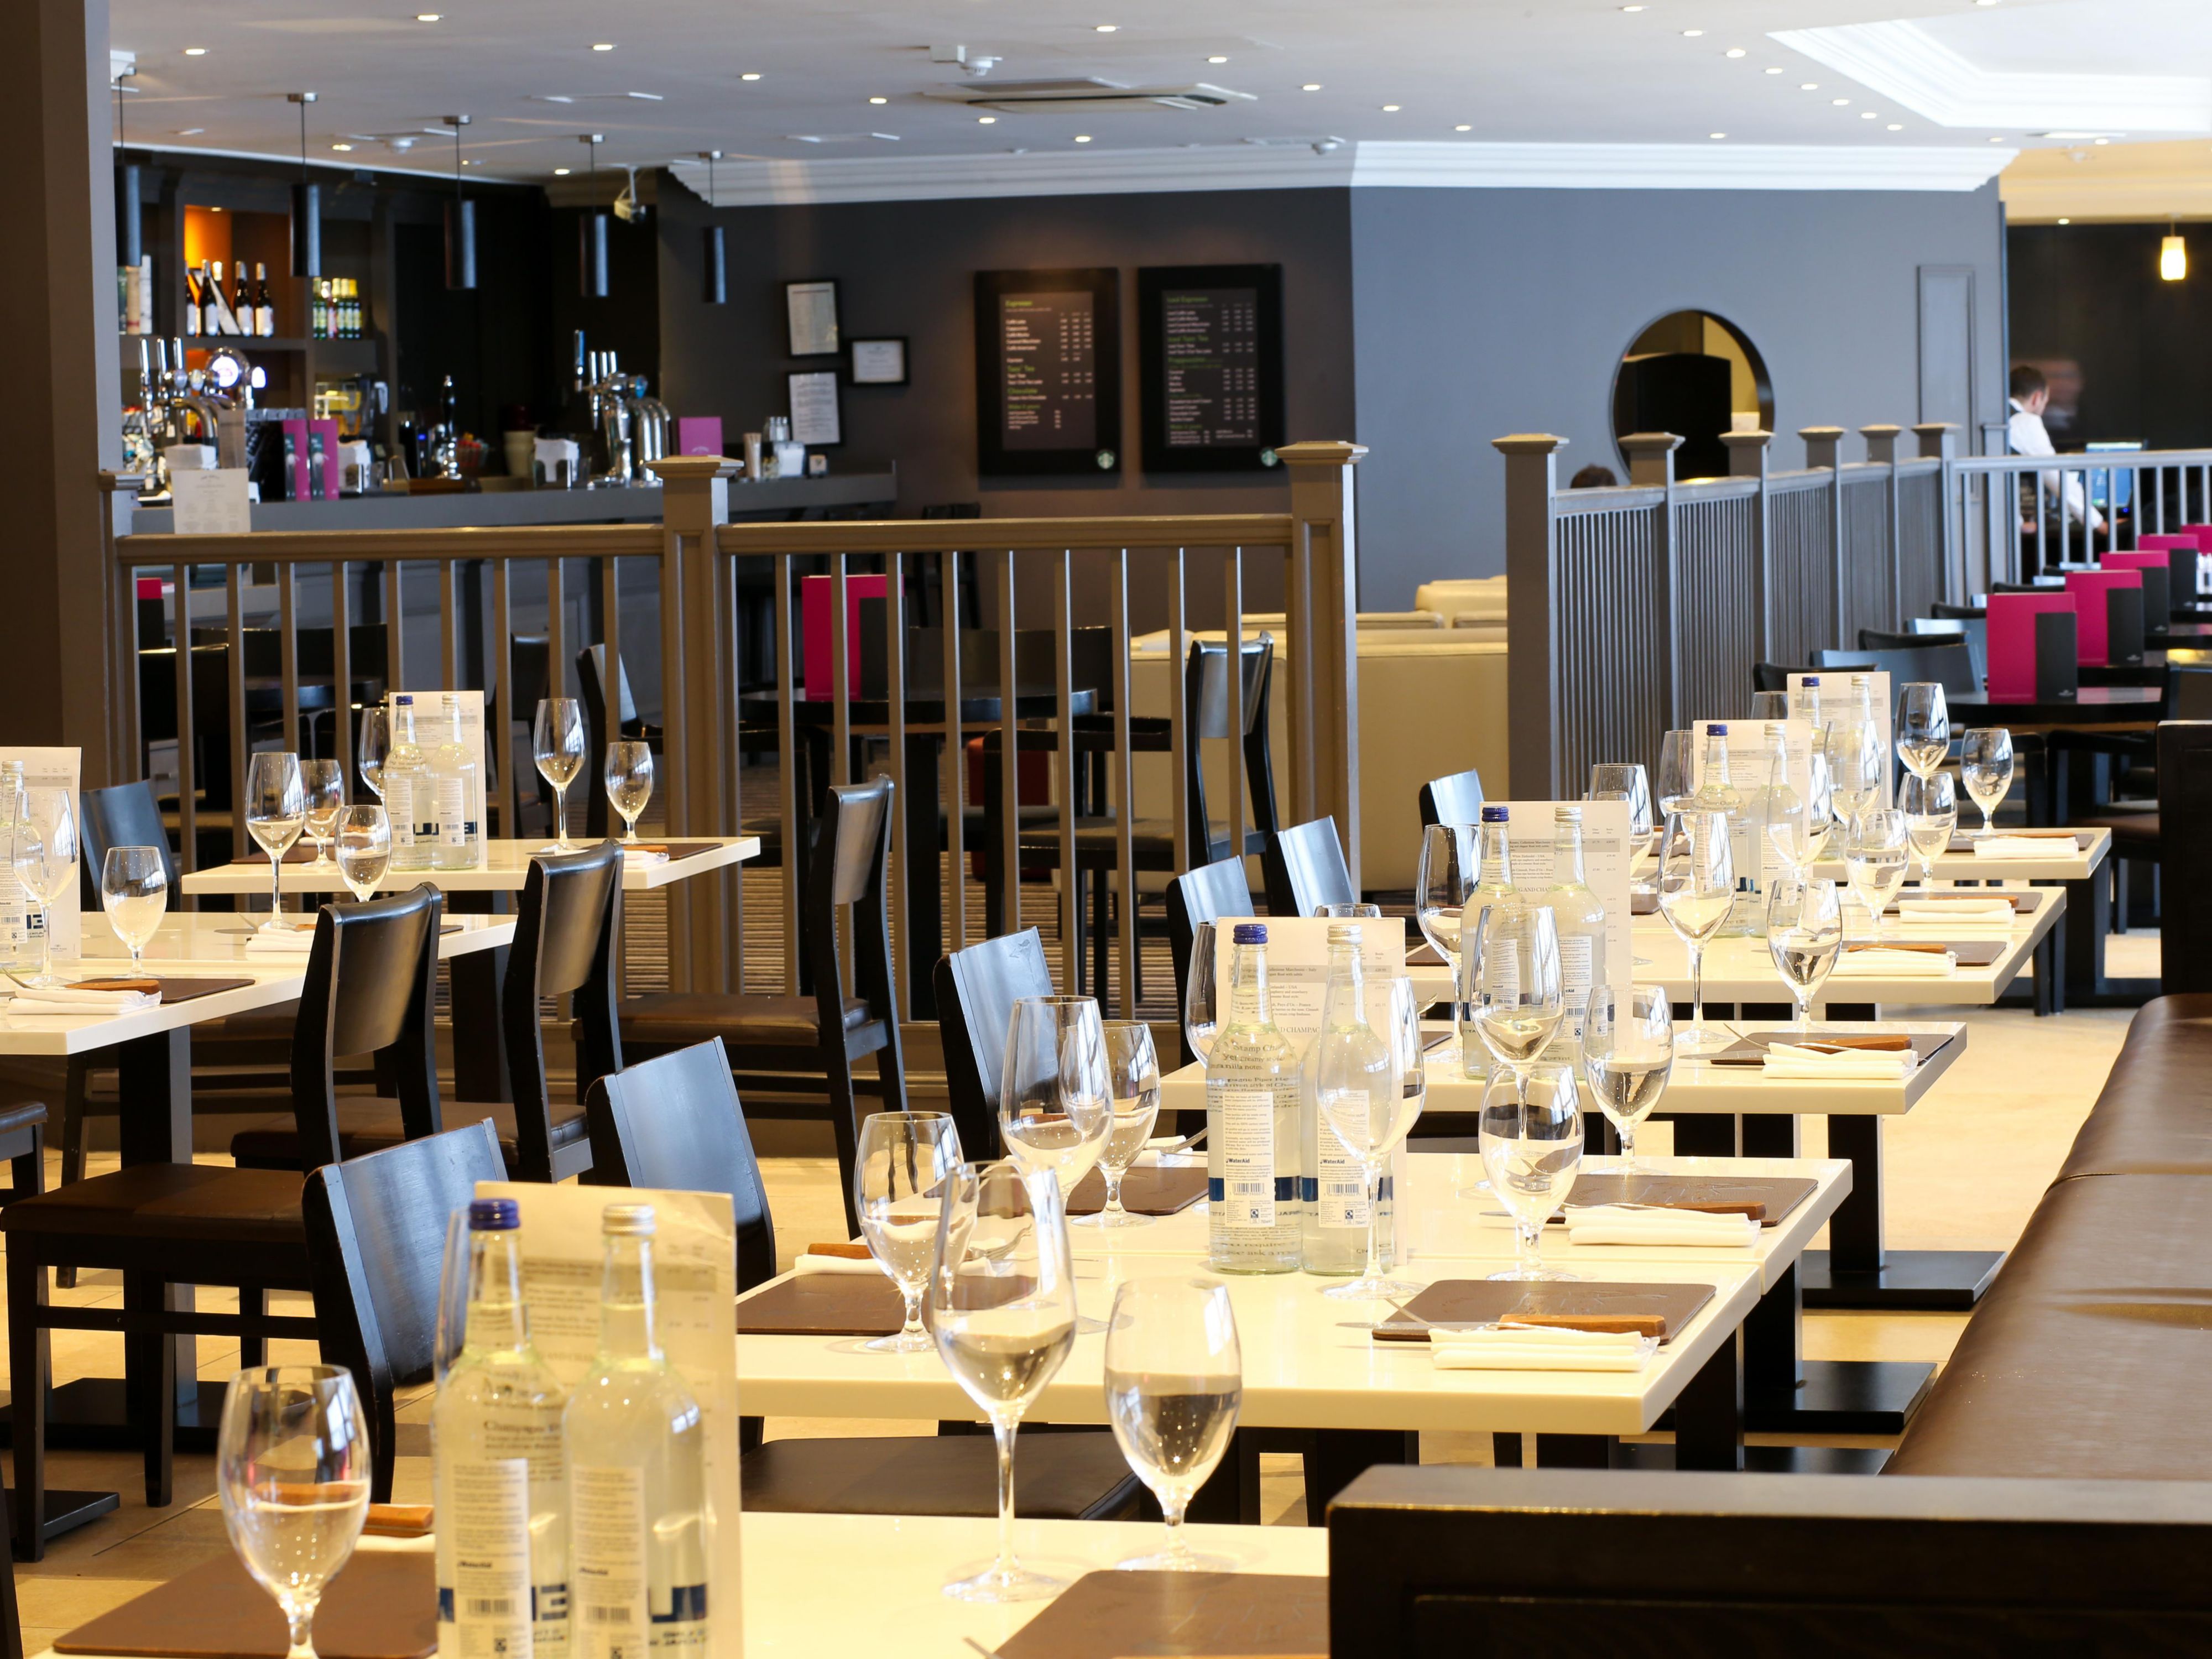 We offer a range of dining options to suit all tastes. The Grill is open for breakfast and dinner serving modern cuisine in a relaxed atmosphere or choose Sampans with its menu inspired by Thai, Malaysian and Chinese cuisine. Callaghan’s Irish Bar is perfect for drinks with friends or a family meal of traditional fayre.   